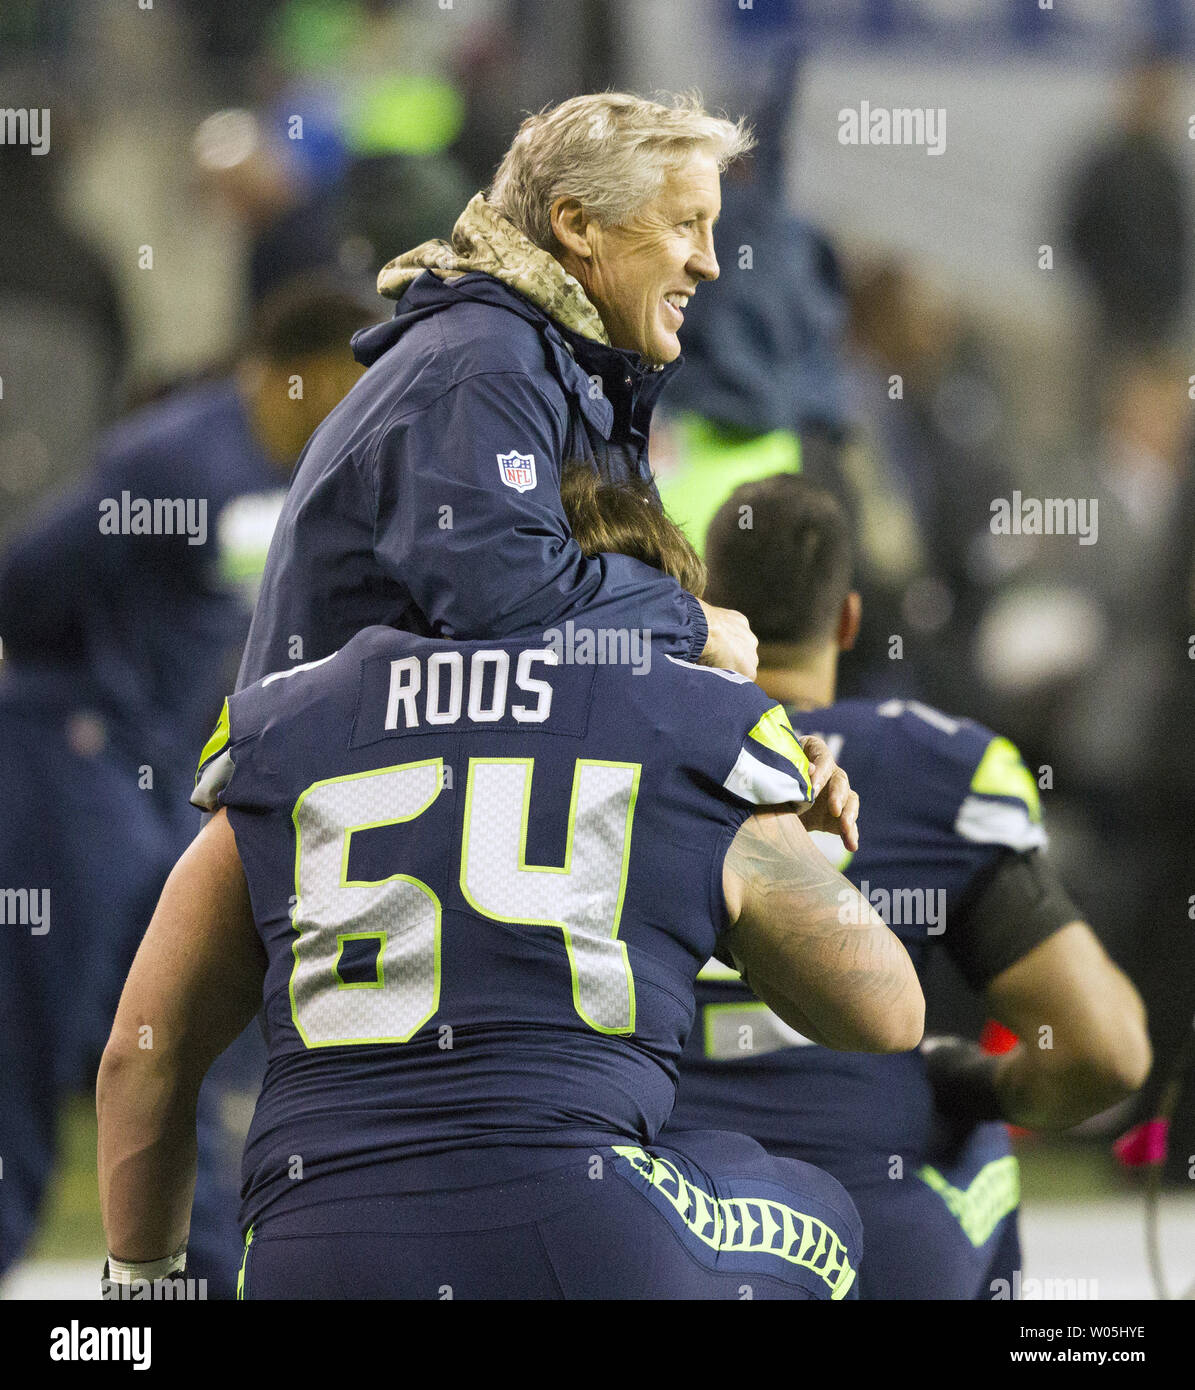 Seattle Seahawks head coach Pete Carroll jokes with offensive guard Jordan  Roos (64) during warm ups before their game against the Atlanta Falcons at  CenturyLink Field in Seattle, Washington on November 20,